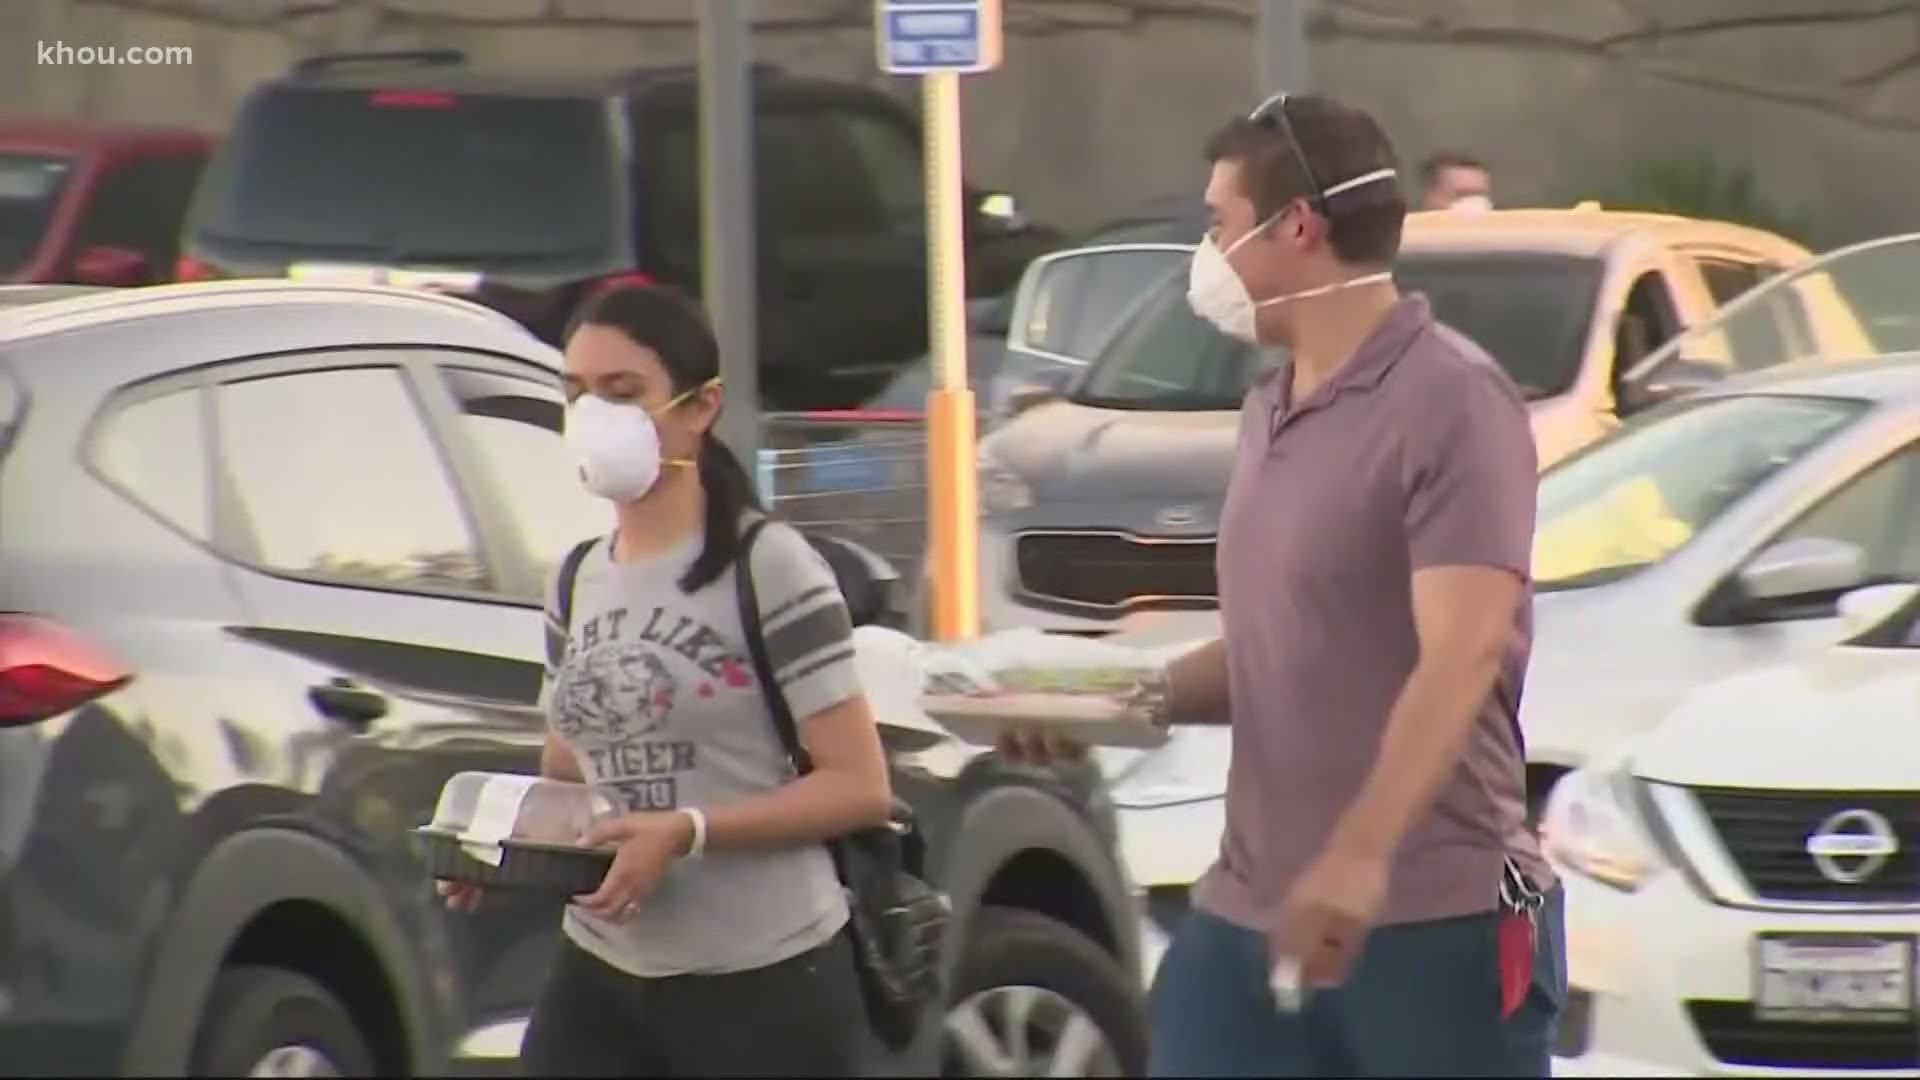 A Harris County order requiring everyone, including visitors and residents, wear face coverings when in public went into full effect Monday. Our Janel Forte reports.